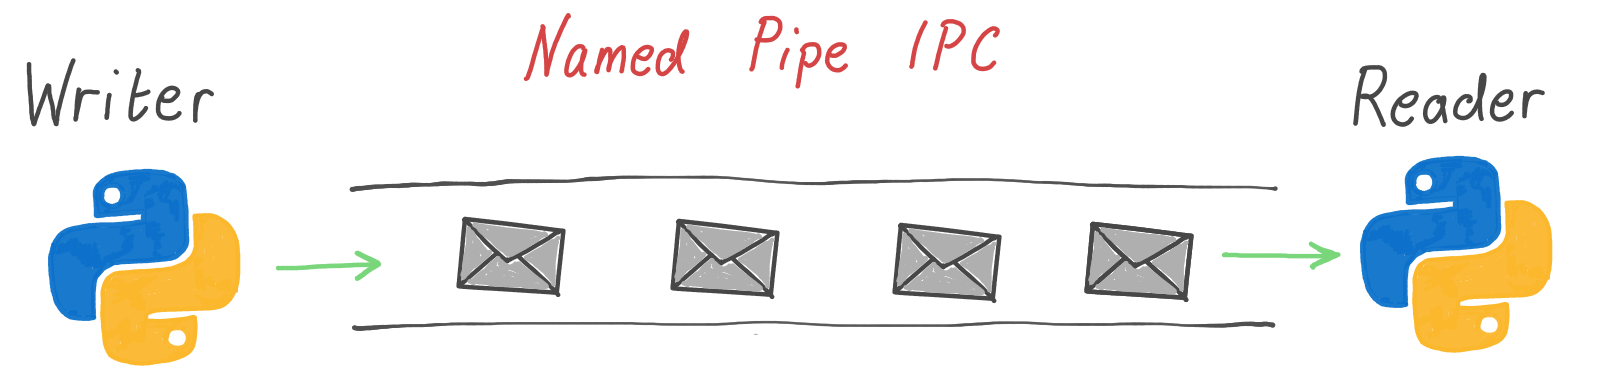 Illustration of IPC using a named pipe